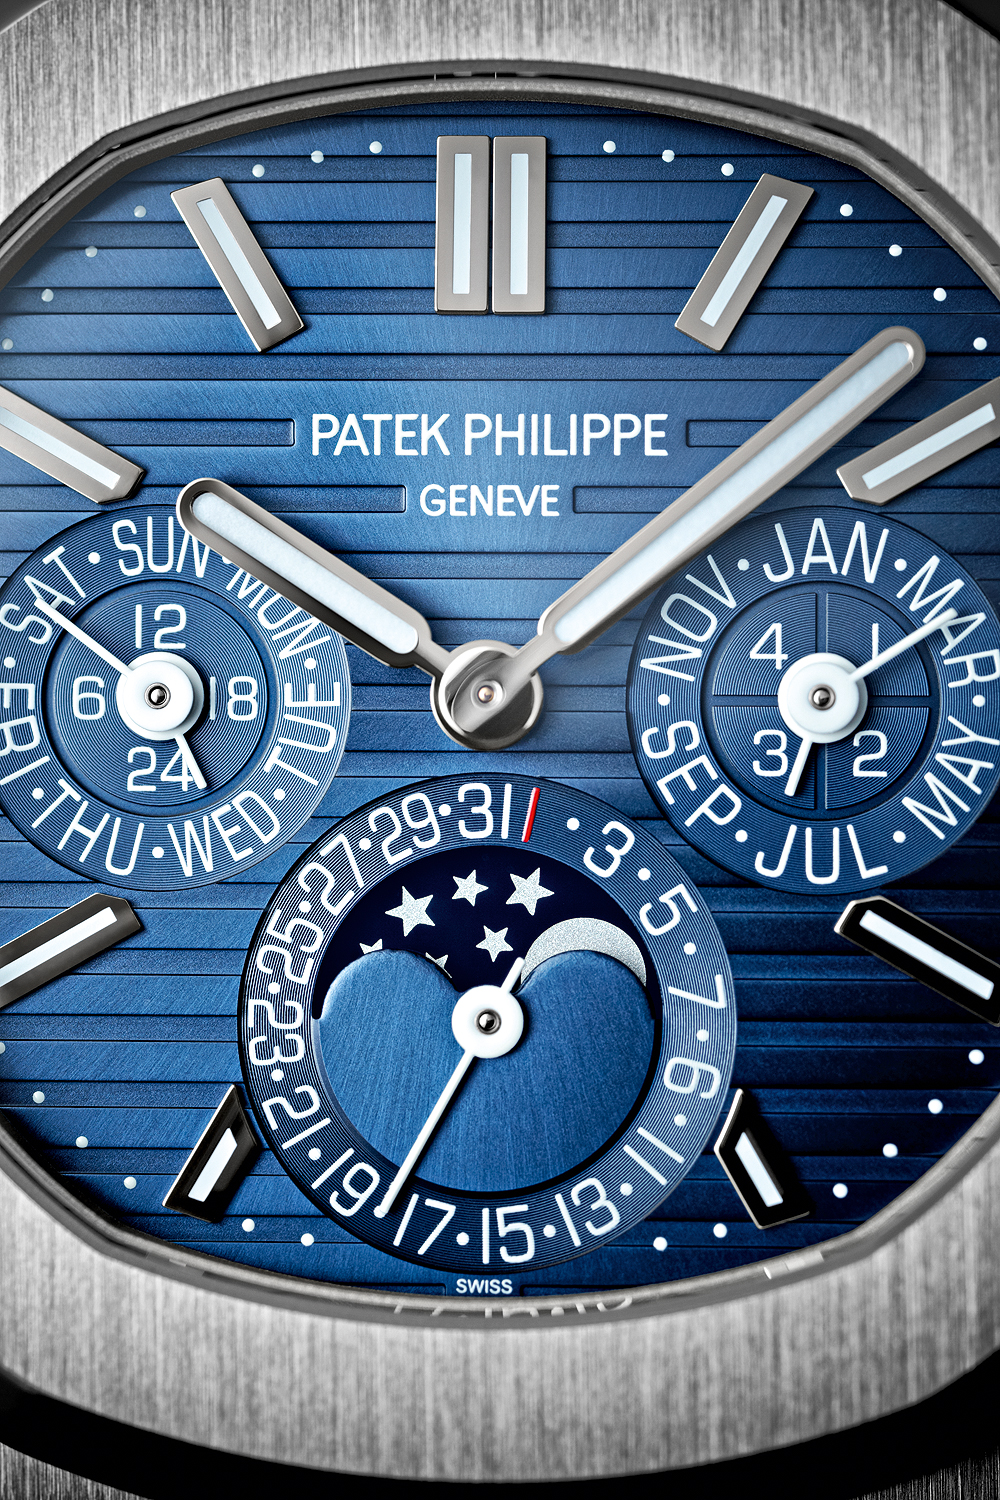 PATEK PHILIPPE, NAUTILUS, REF 5740/1G-001, WHITE GOLD PERPETUAL CALENDAR  BRACELET WATCH, MADE IN 2019, Important Watches, 2020